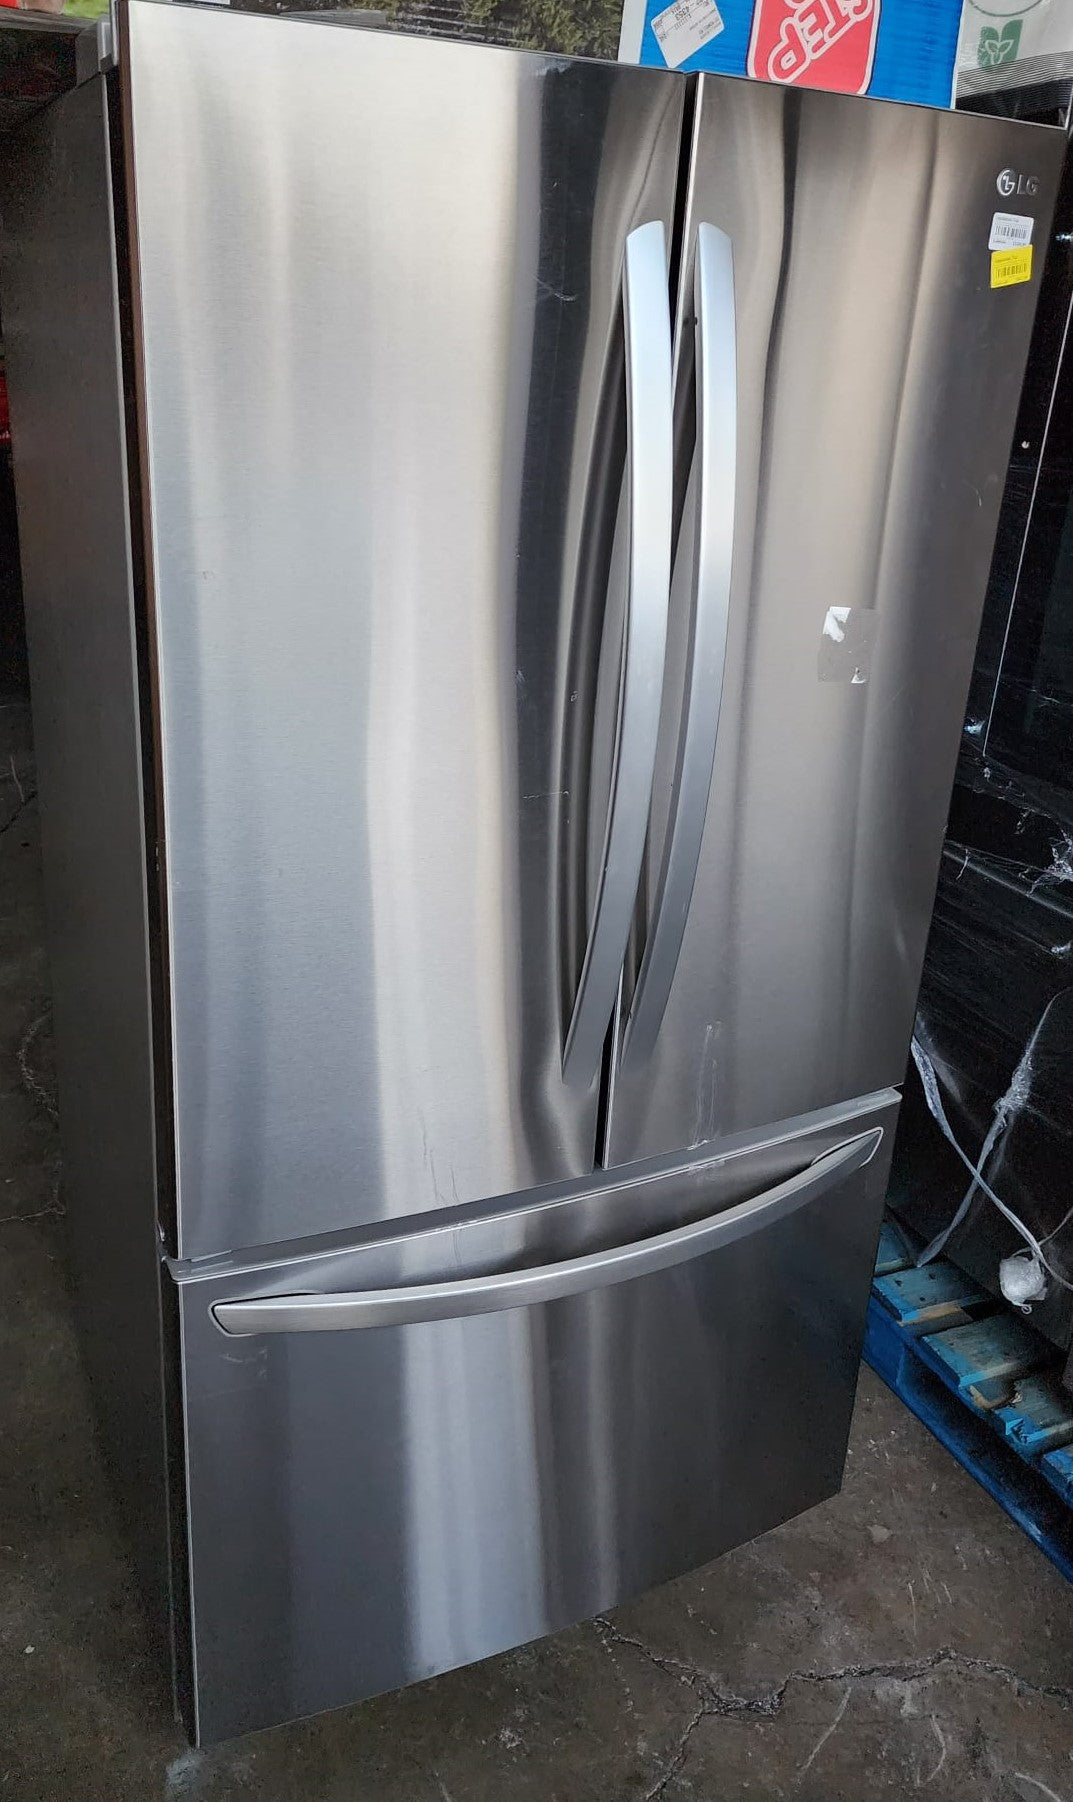 Dented LG 36 in. 29 cu. ft. Smudge-Resistant Stainless Steel French Door Refrigerator with Door Cooling+ Item, pictures might not be the same of actual product